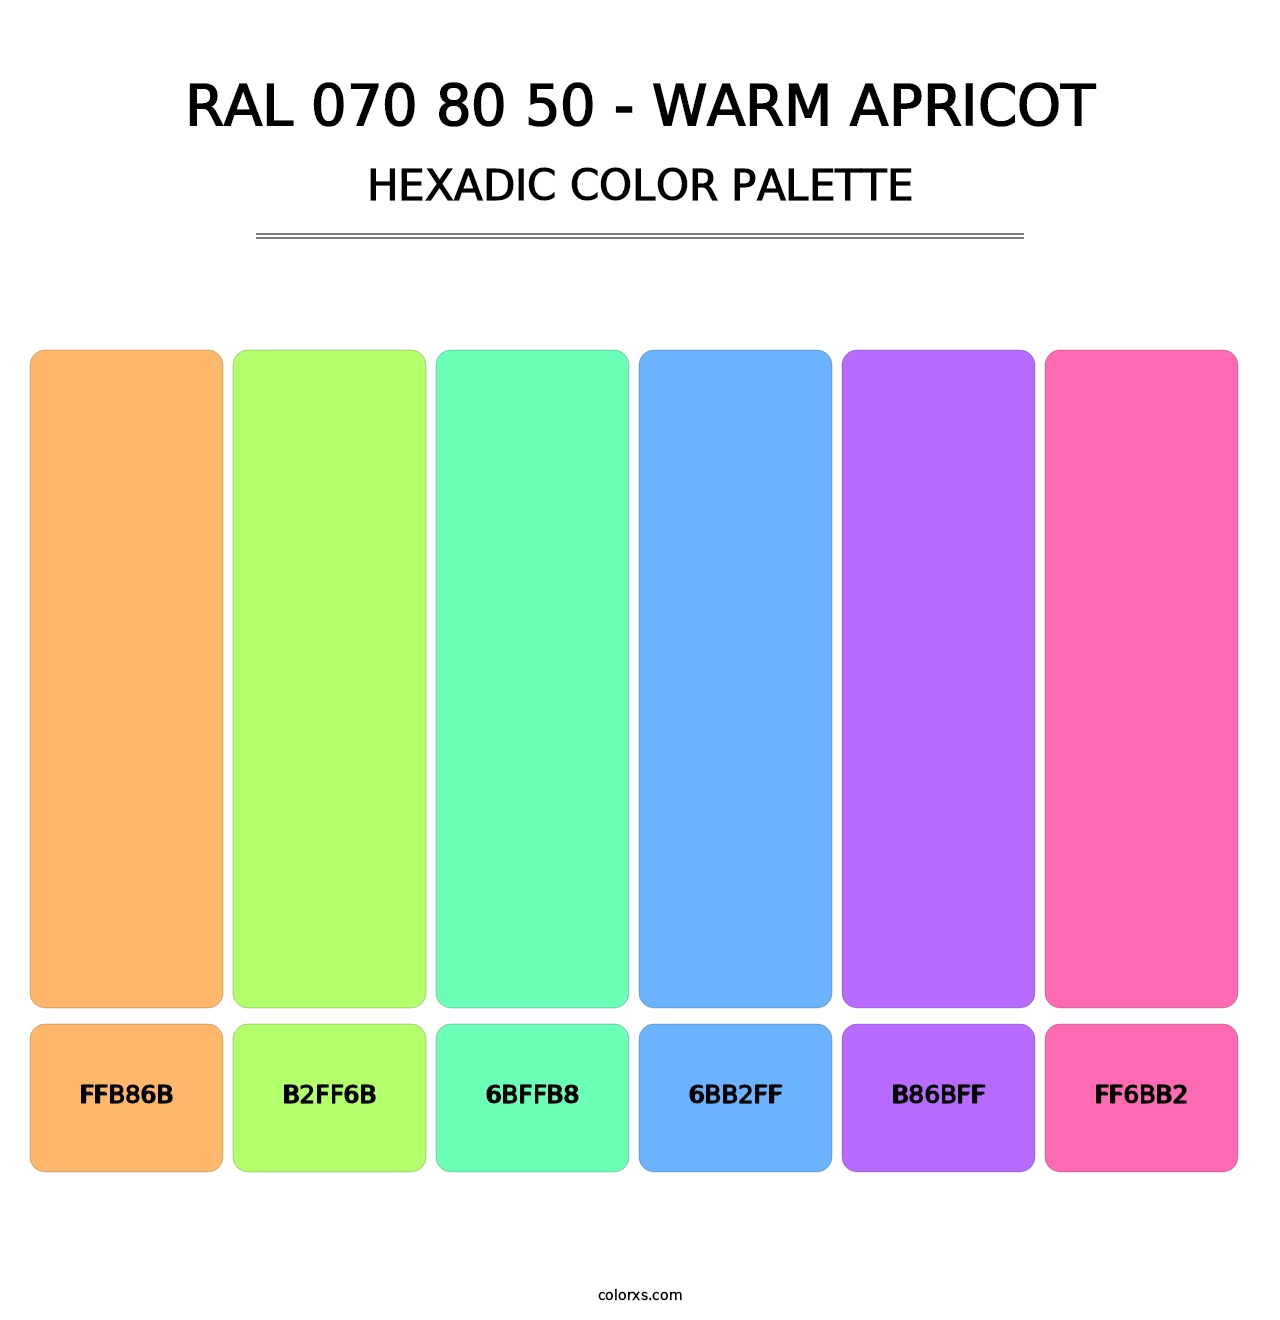 RAL 070 80 50 - Warm Apricot - Hexadic Color Palette